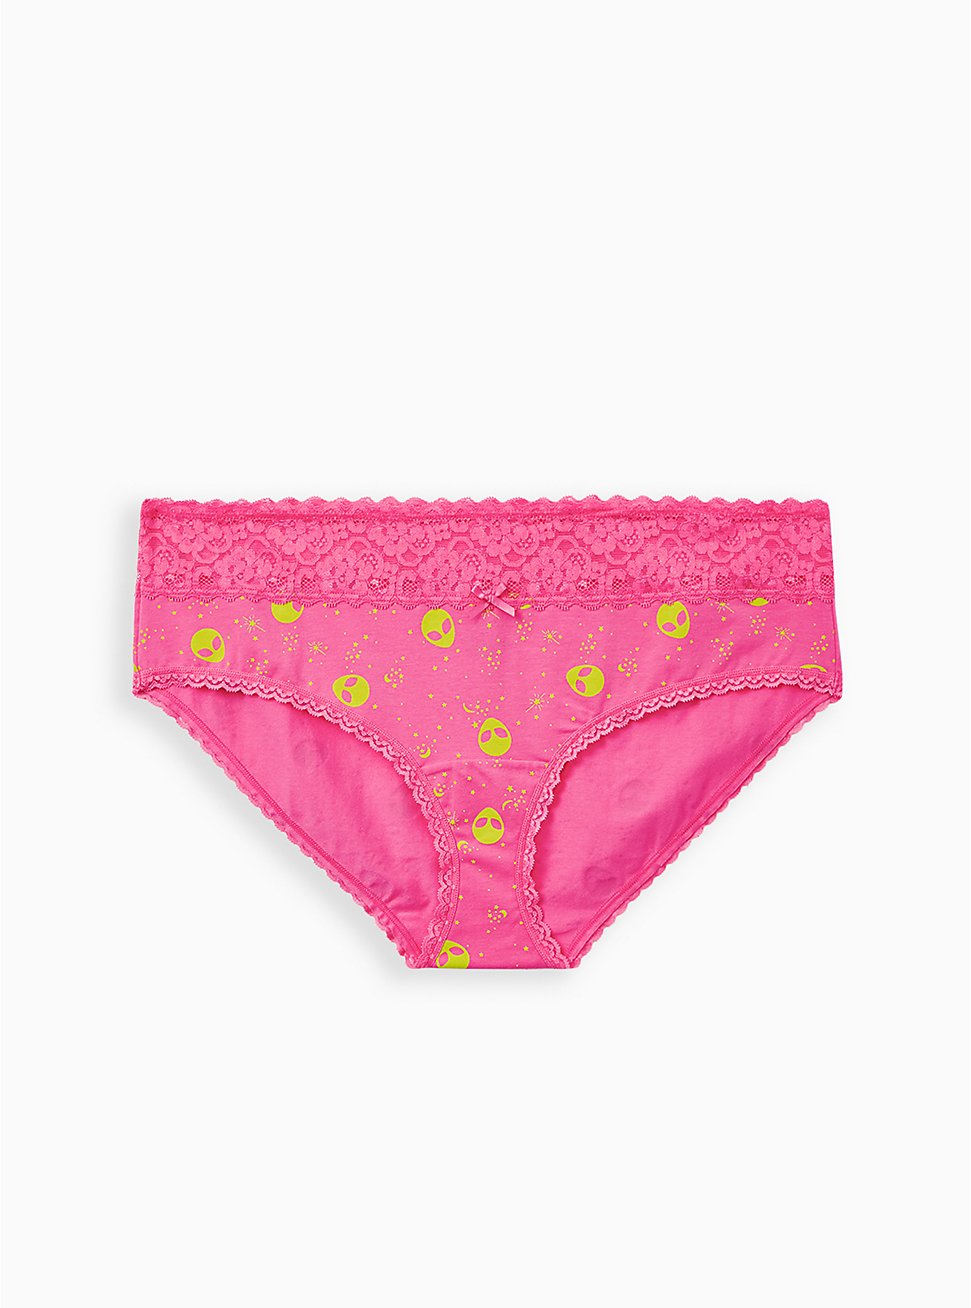 Wide Lace Hipster Panty - Cotton Alien Pink, MULTI, hi-res